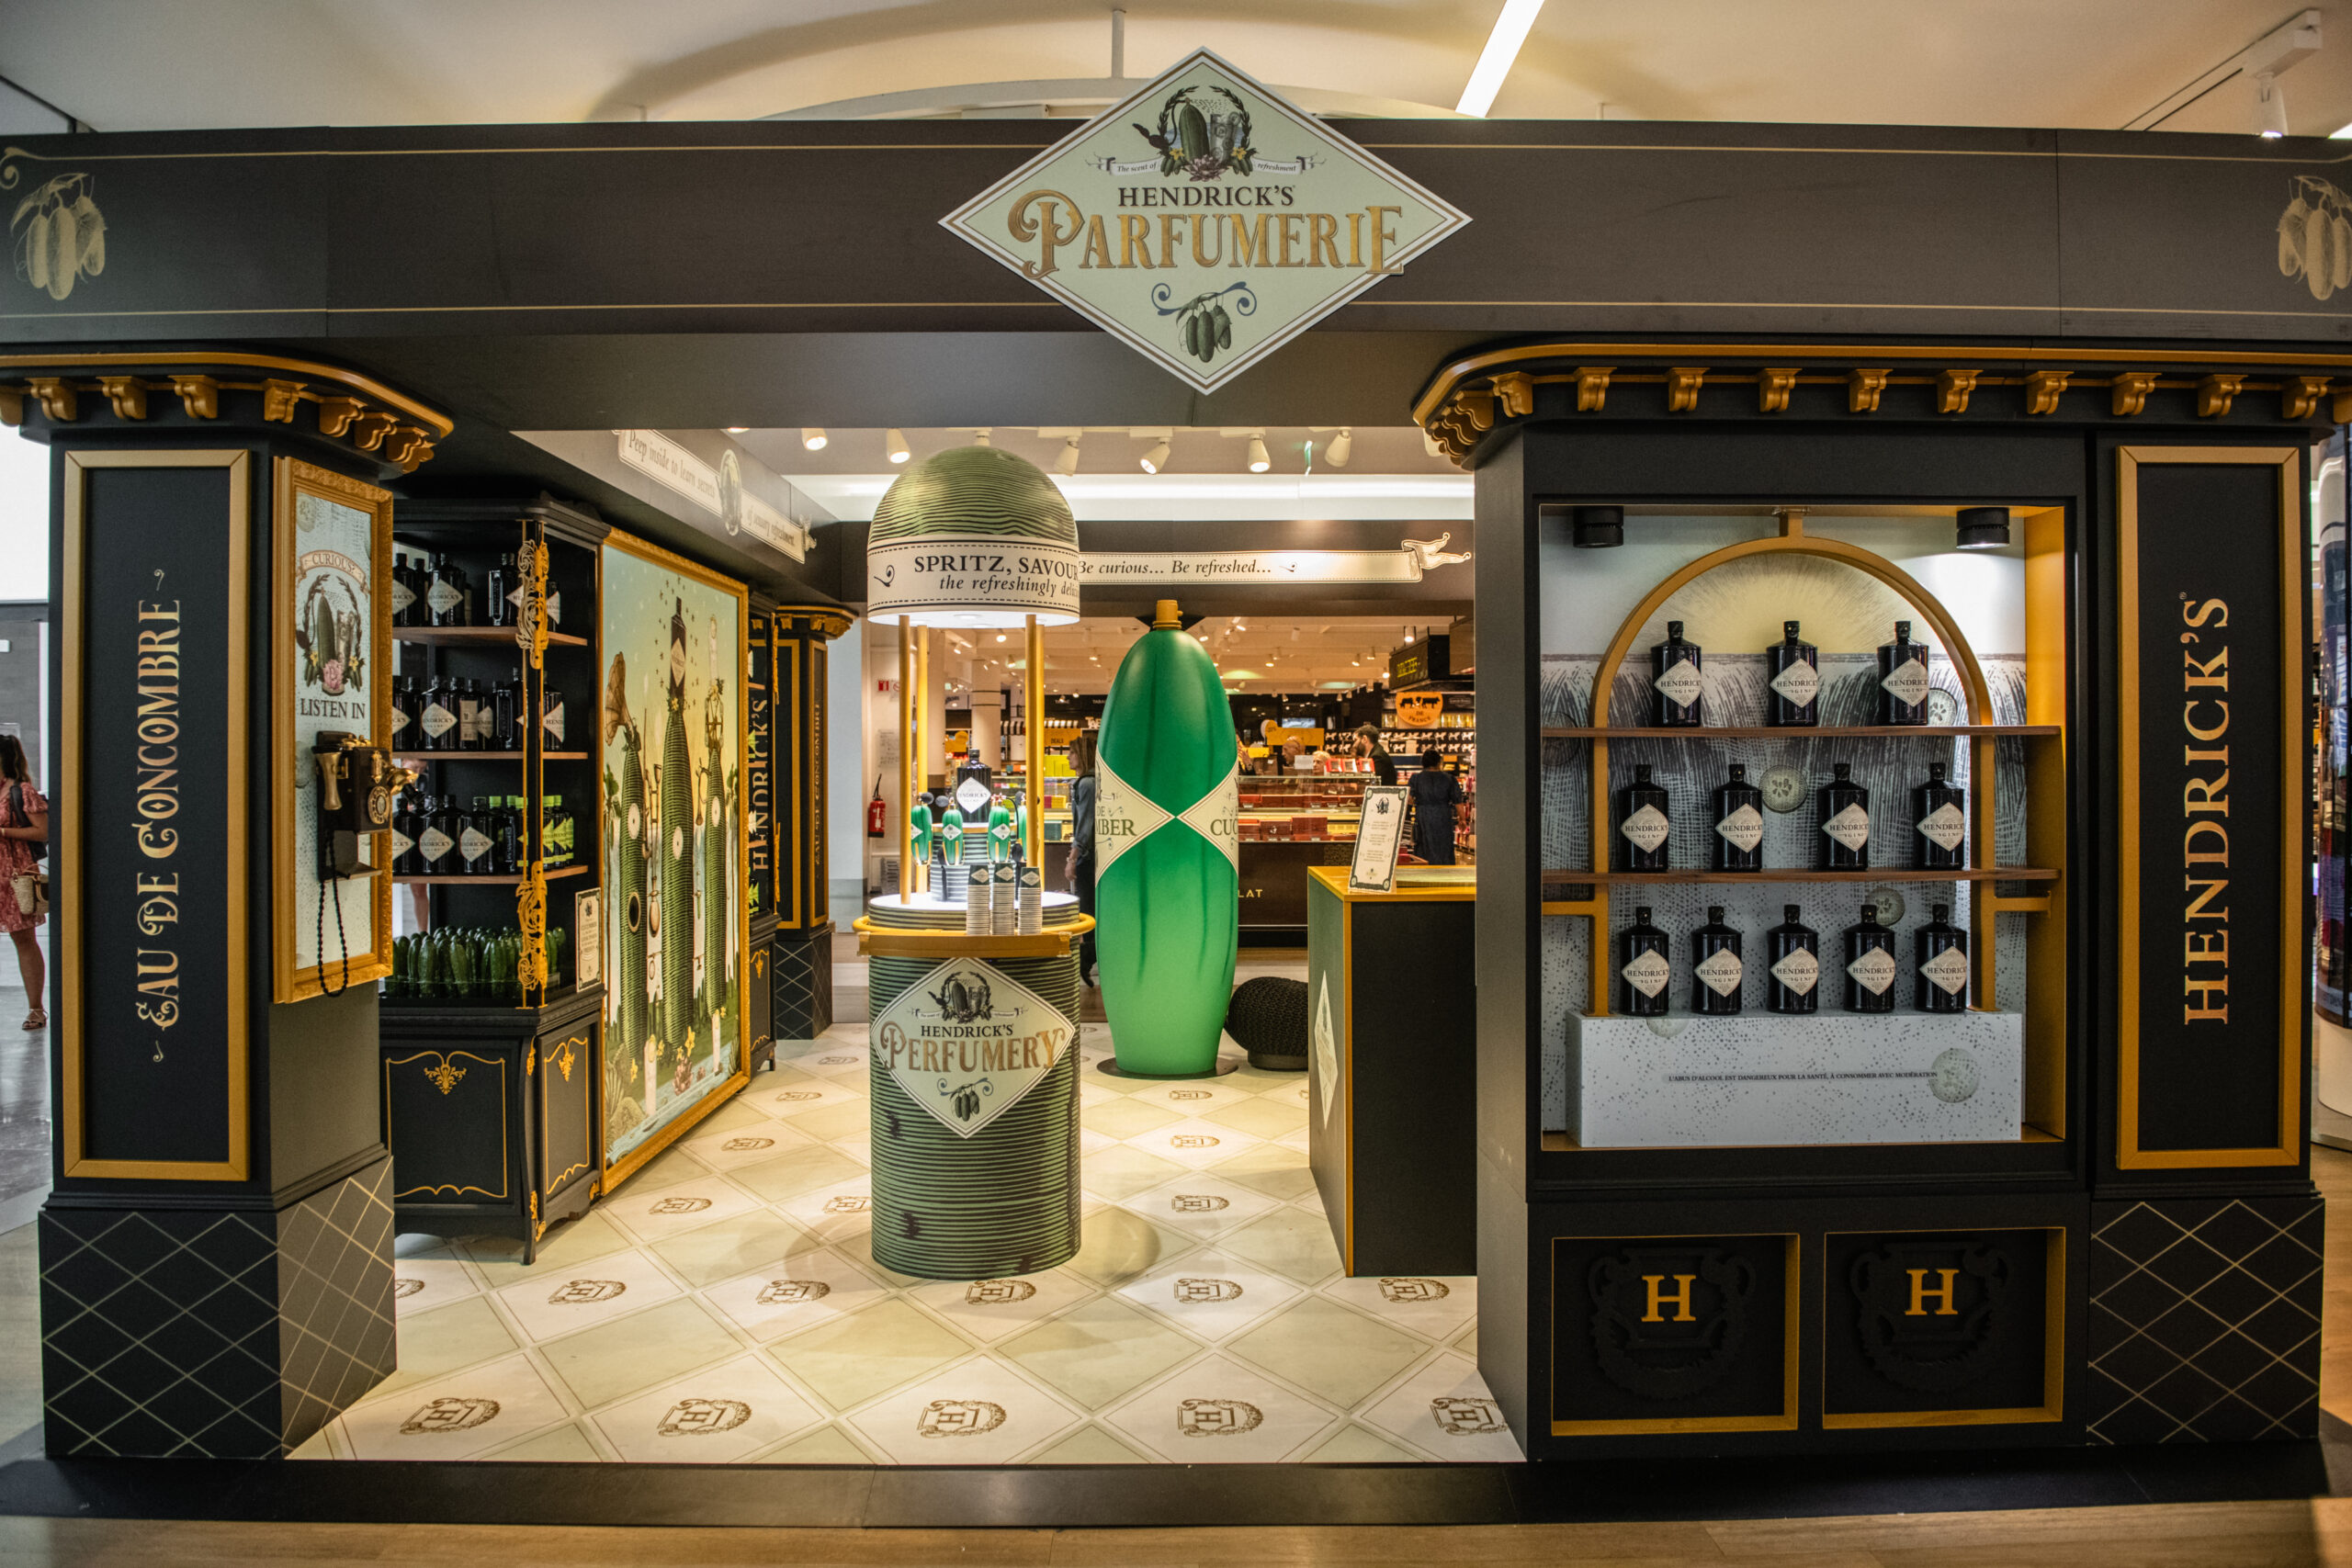 Hendrick’s Perfumery created by Space arrives at Paris Charles de Gaulle Airport